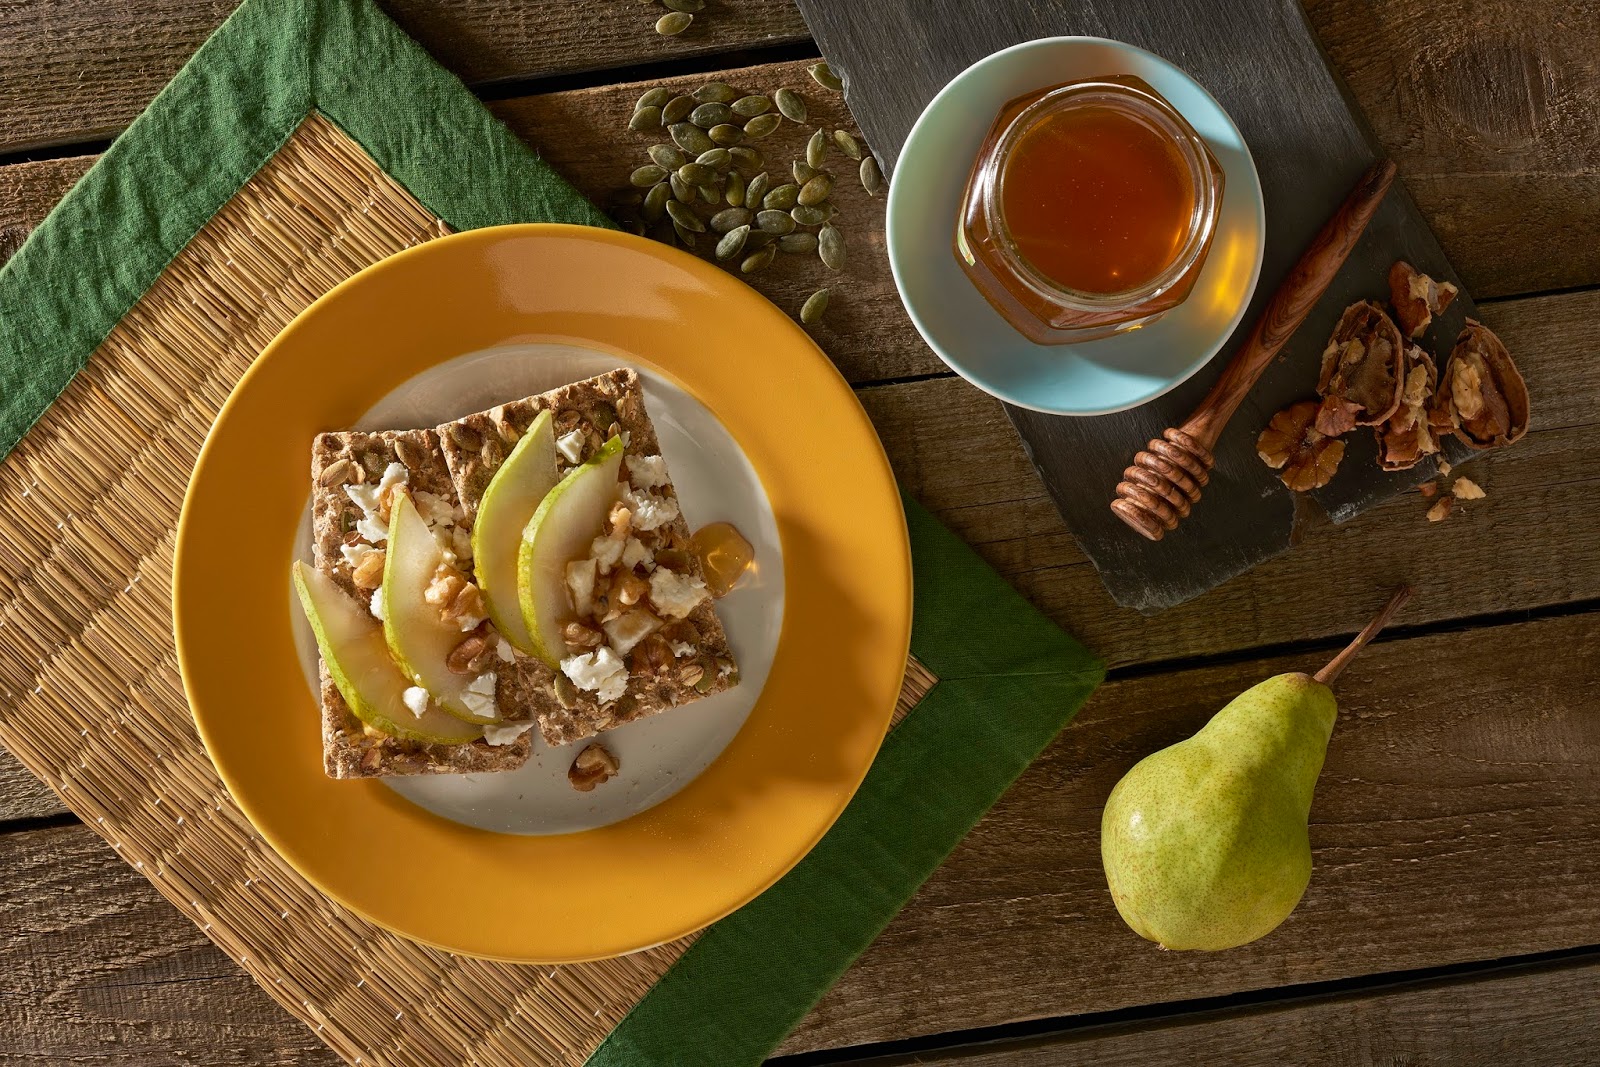 Pumpkin Seed and Oat Ryvita Crispbreads with Feta Cheese and Pear: